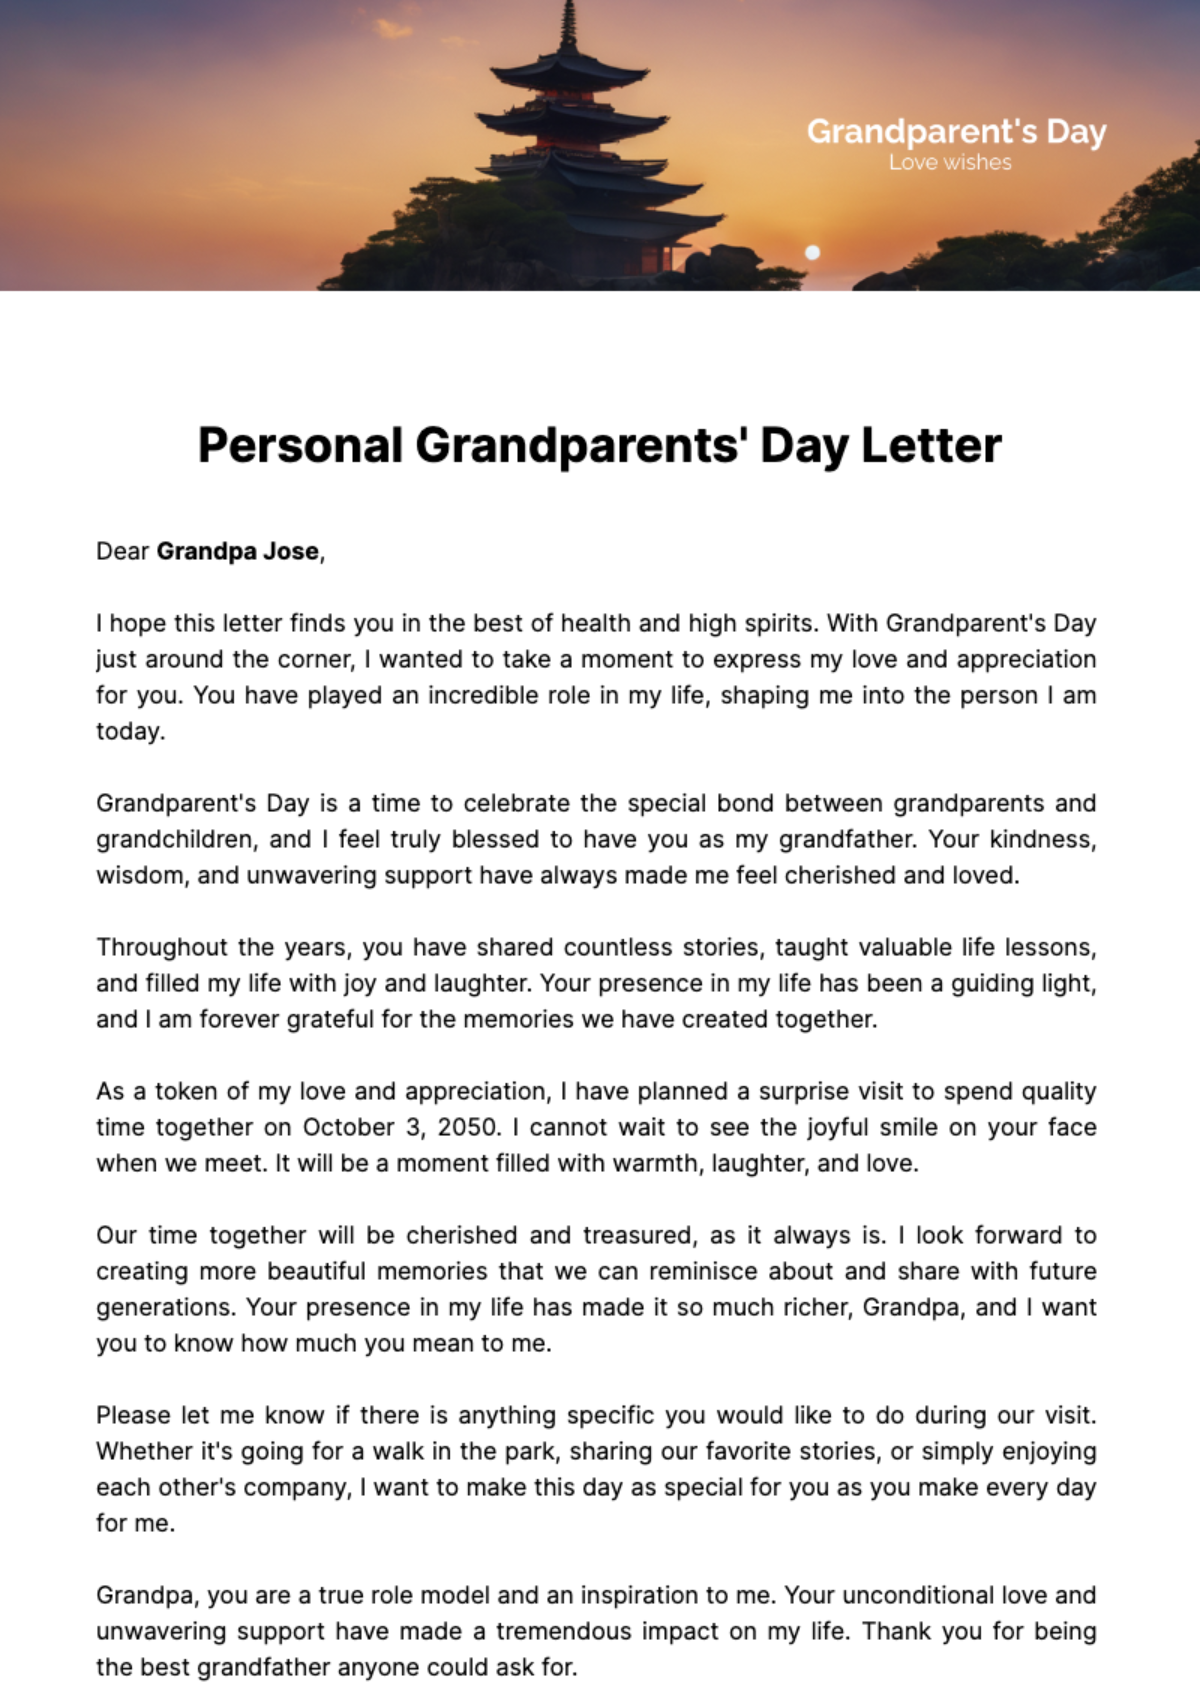 Personal Grandparents' Day Letter Template